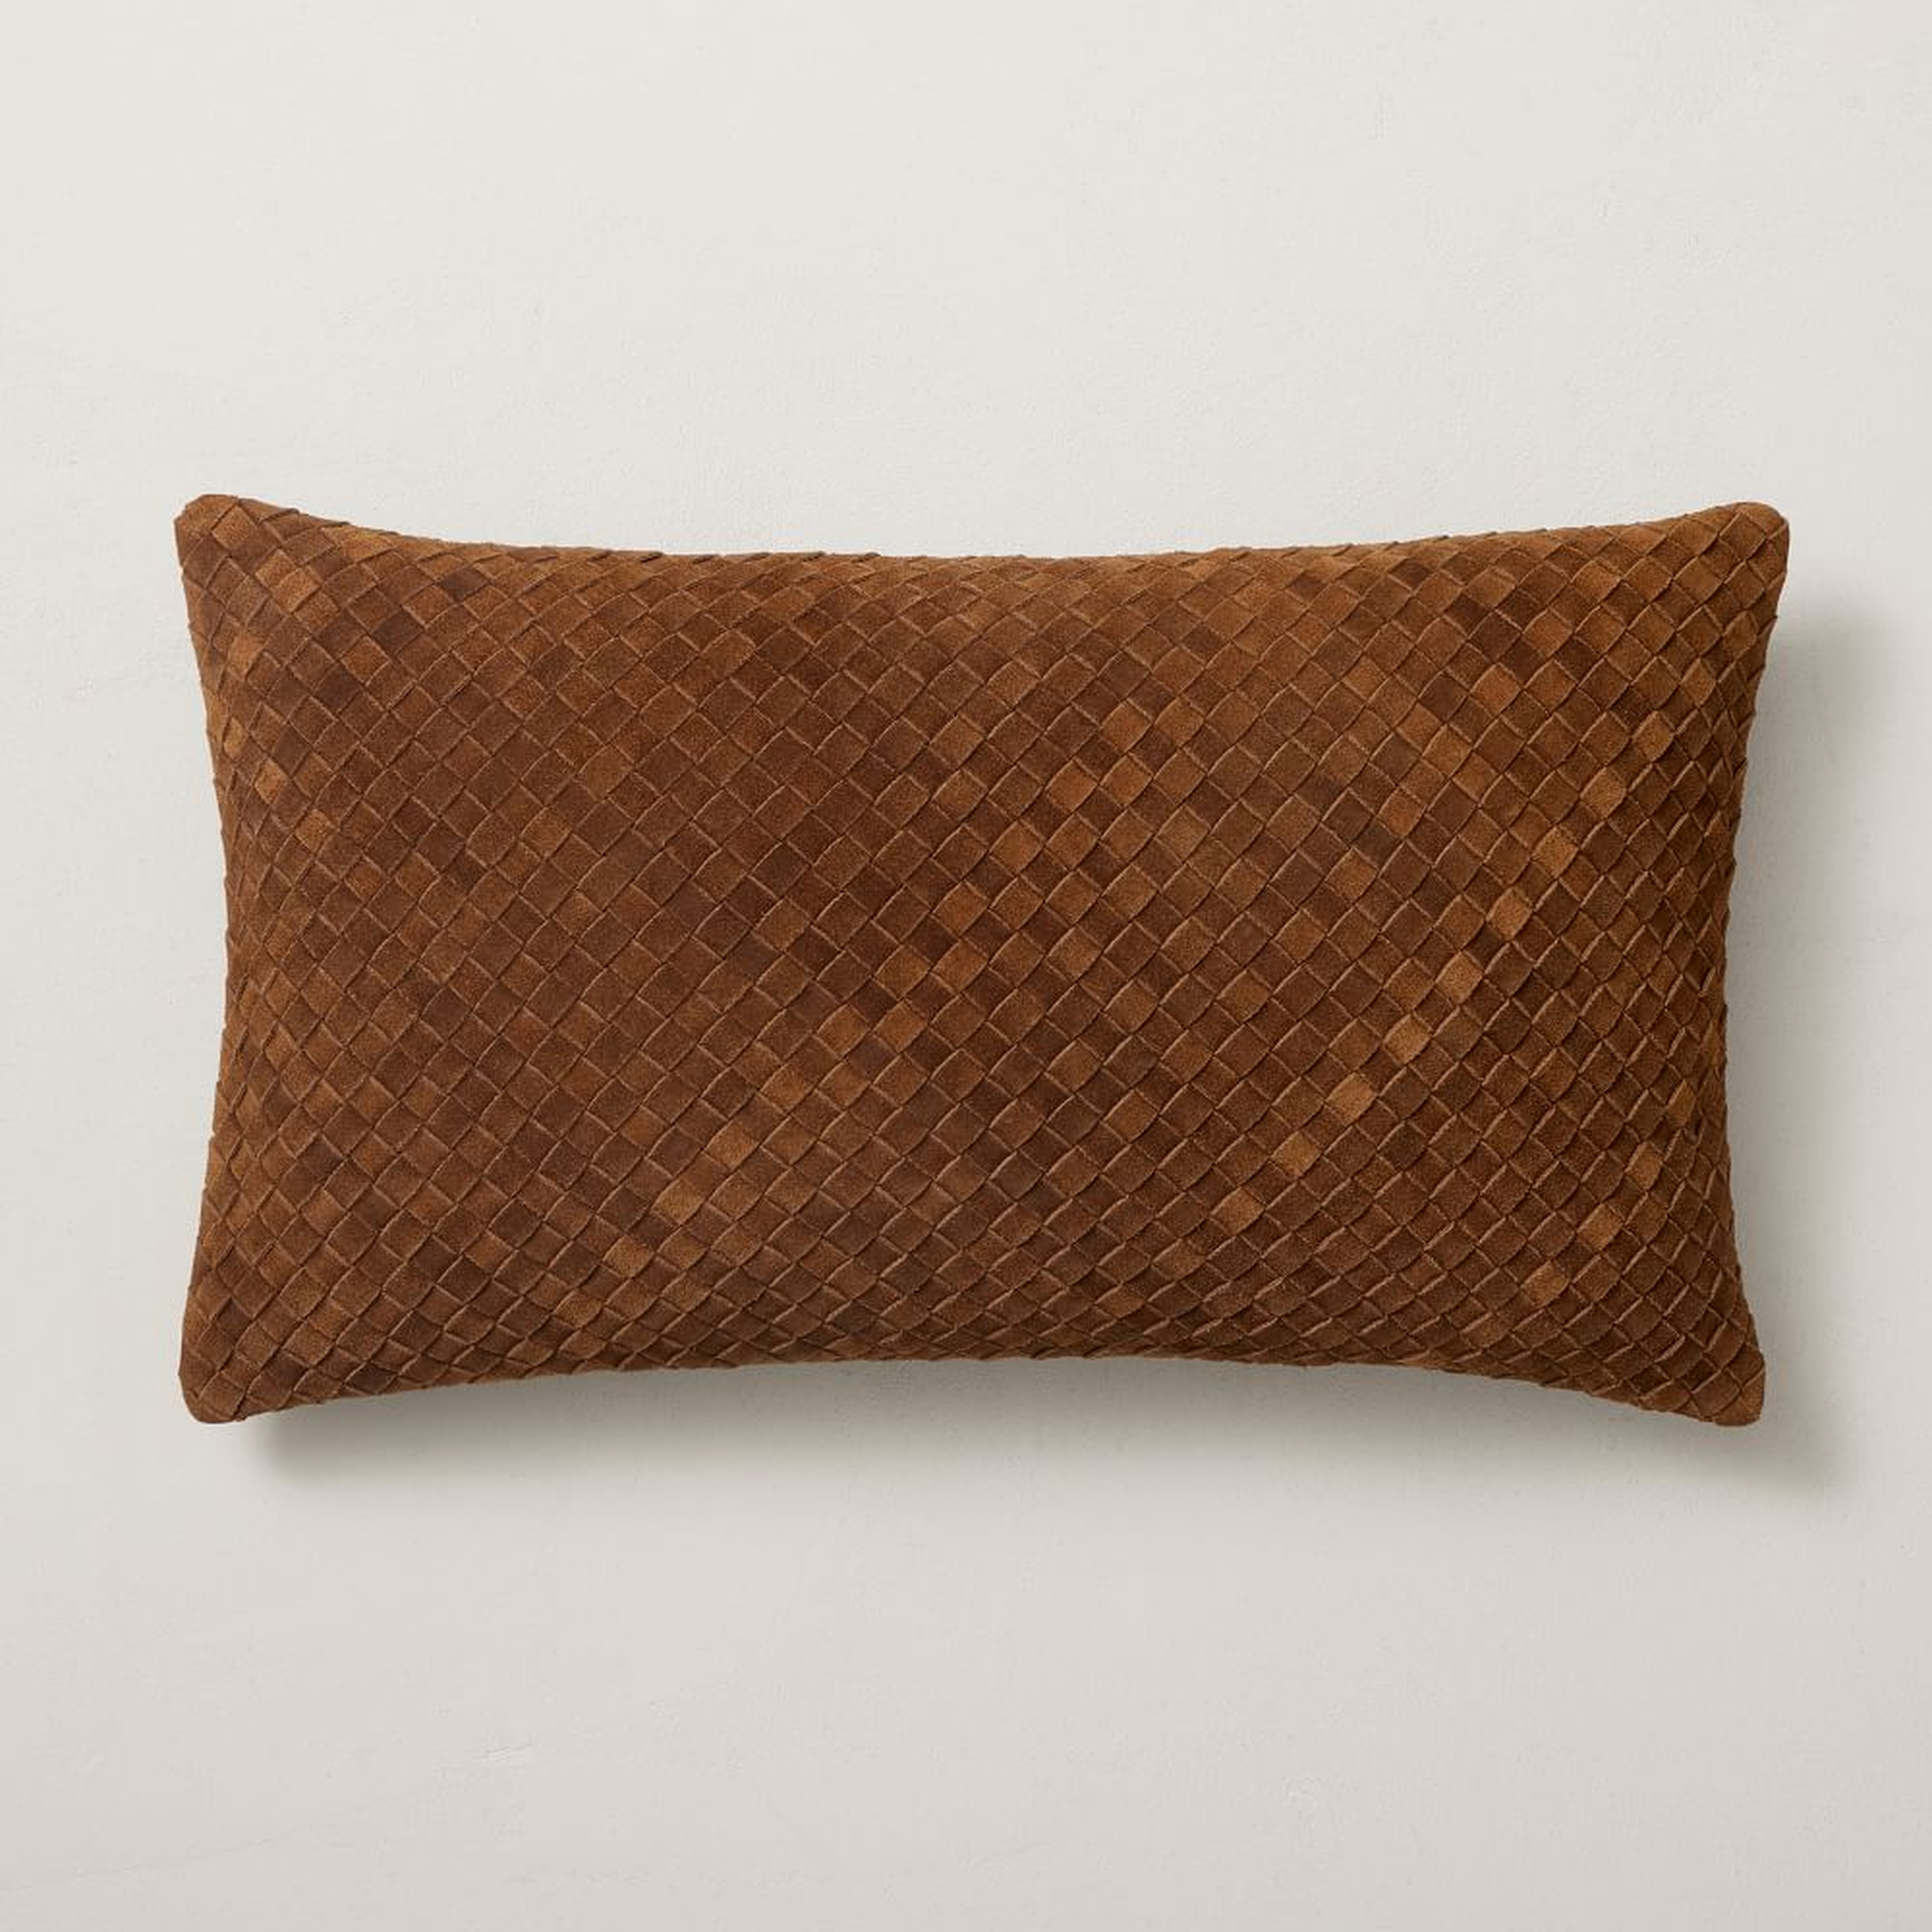 Woven Suede Pillow Cover, 12"x21", Cardamom - West Elm